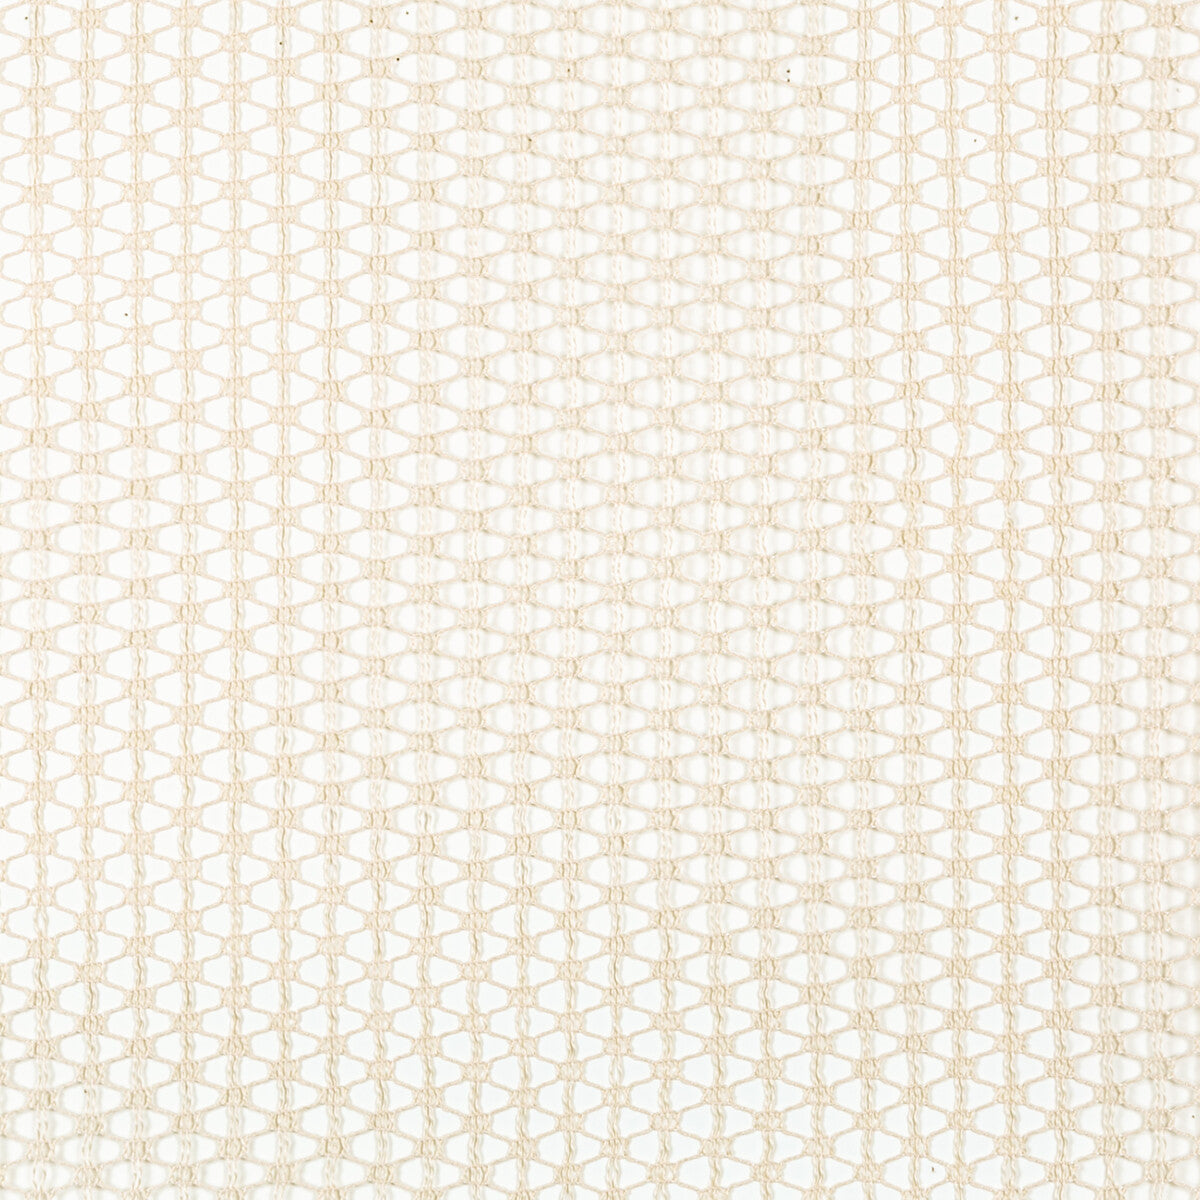 Fresh Air fabric in parchment color - pattern 4823.1.0 - by Kravet Contract